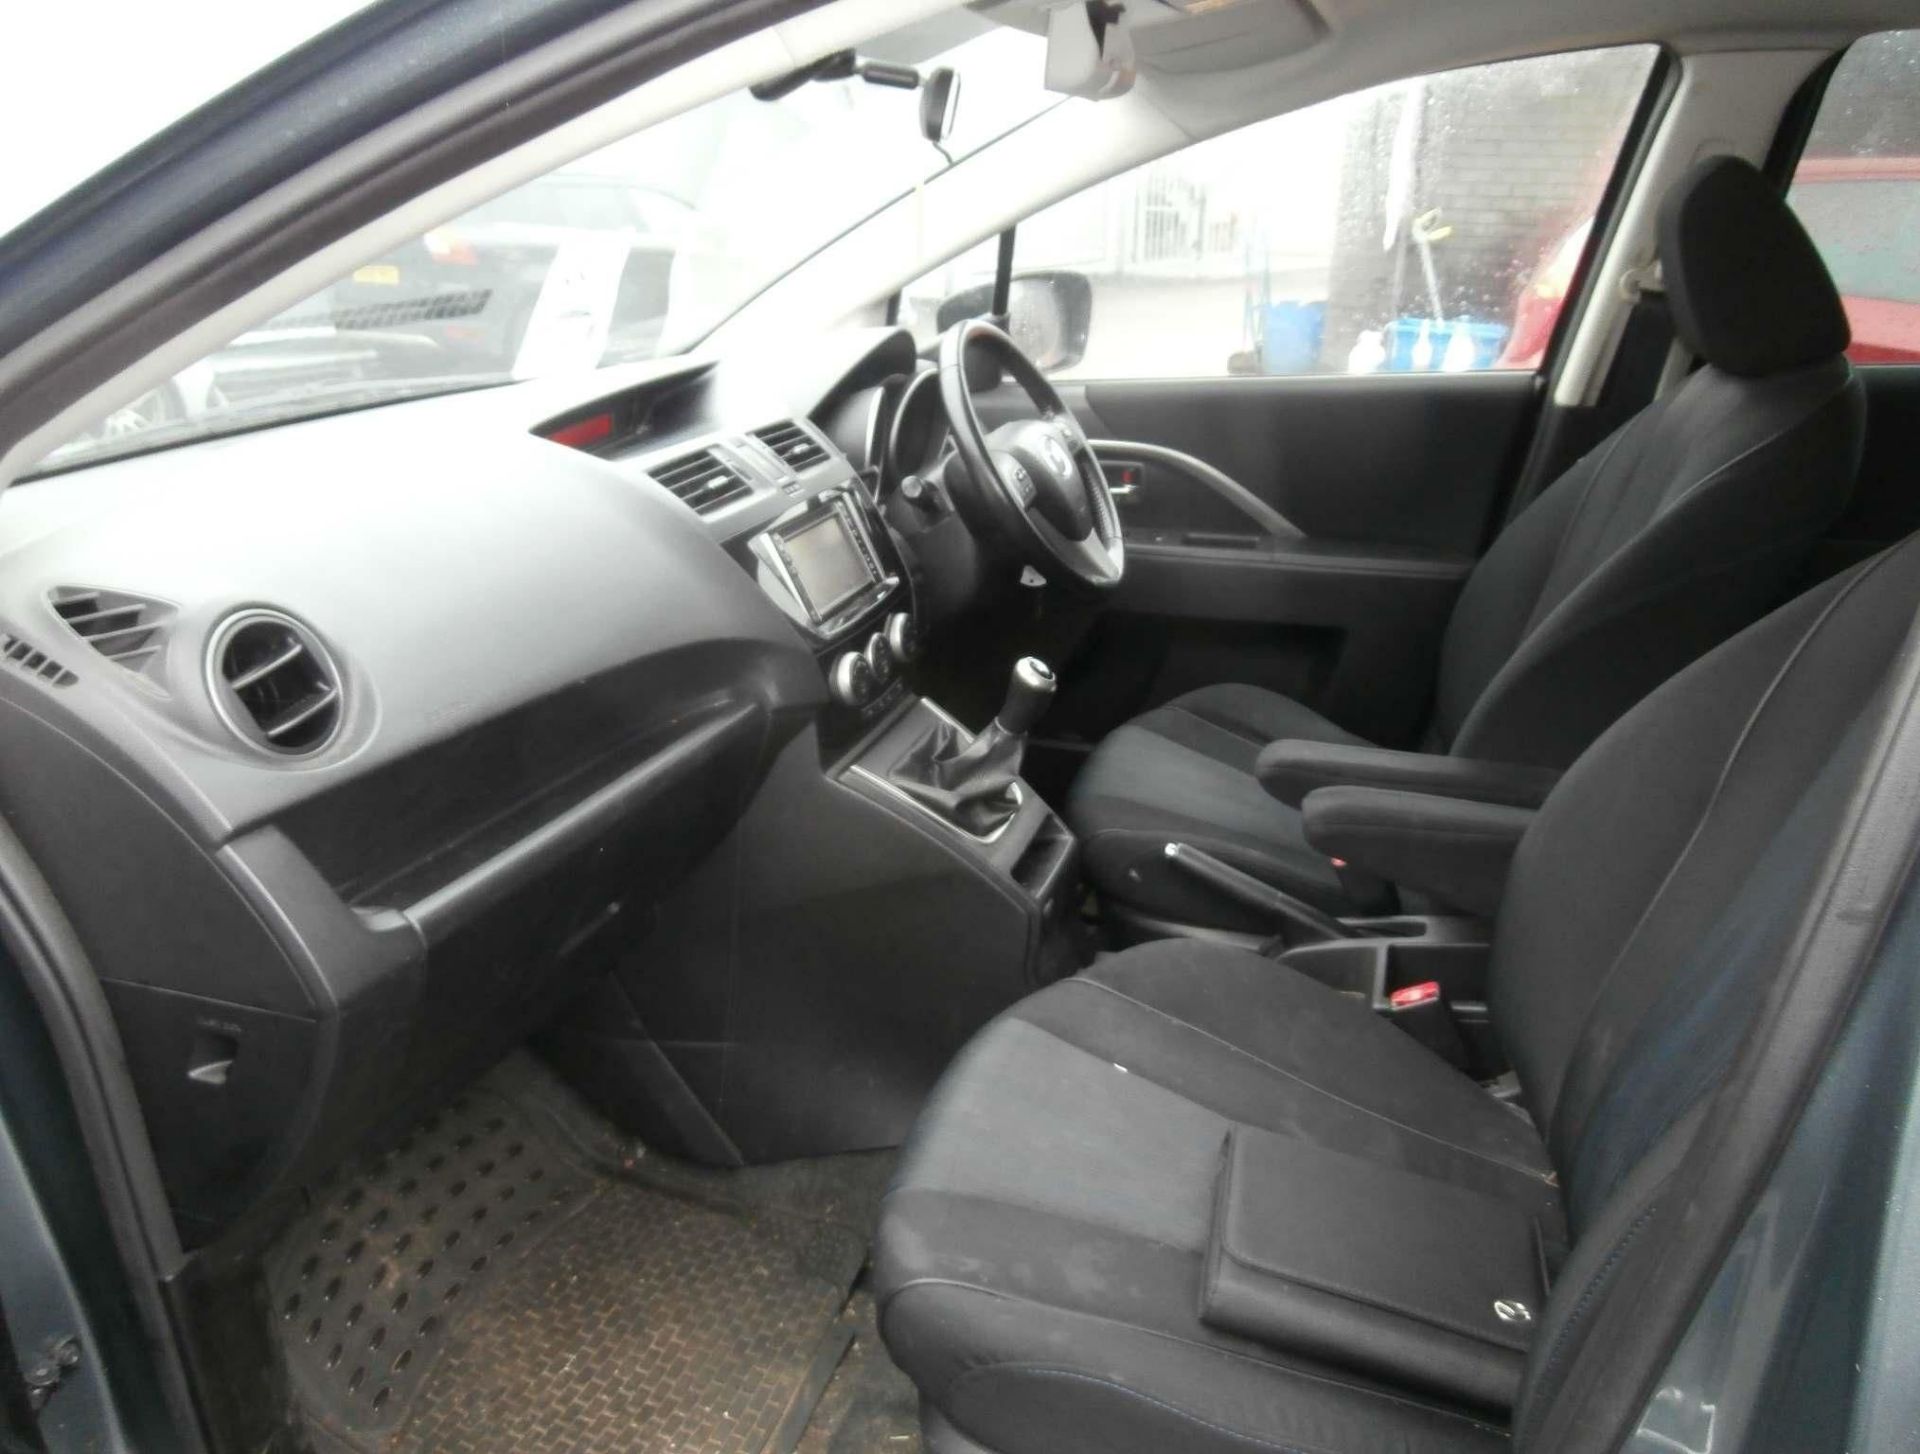 2013 Mazda 5 2.0 Venture Edition 5 Dr MPV - CL505 - NO VAT ON THE HAMMER - Location: Corby, N - Image 7 of 9